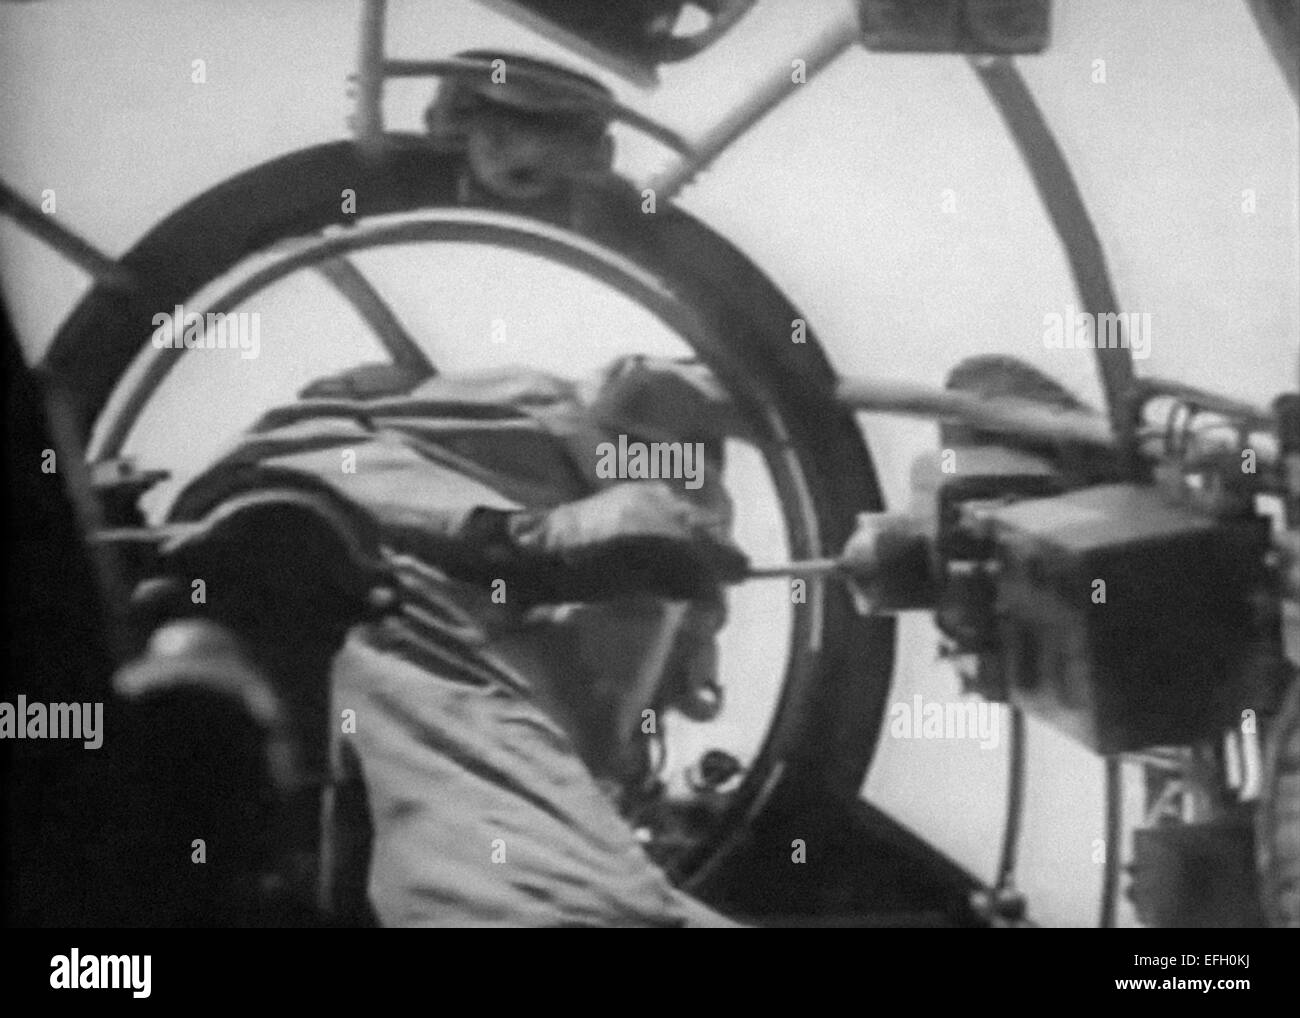 A guidance operator on board a Heinkel He 177 Greif controls a Henschel Hs 293 anti-shipping air to surface guided missile after being dropped from the aircraft during testing in December 1940. The missile powered by a  Walter HWK 109-507 rocket motor was remote controlled via radio enabling the operator to change the missile's course using a joystick. Stock Photo